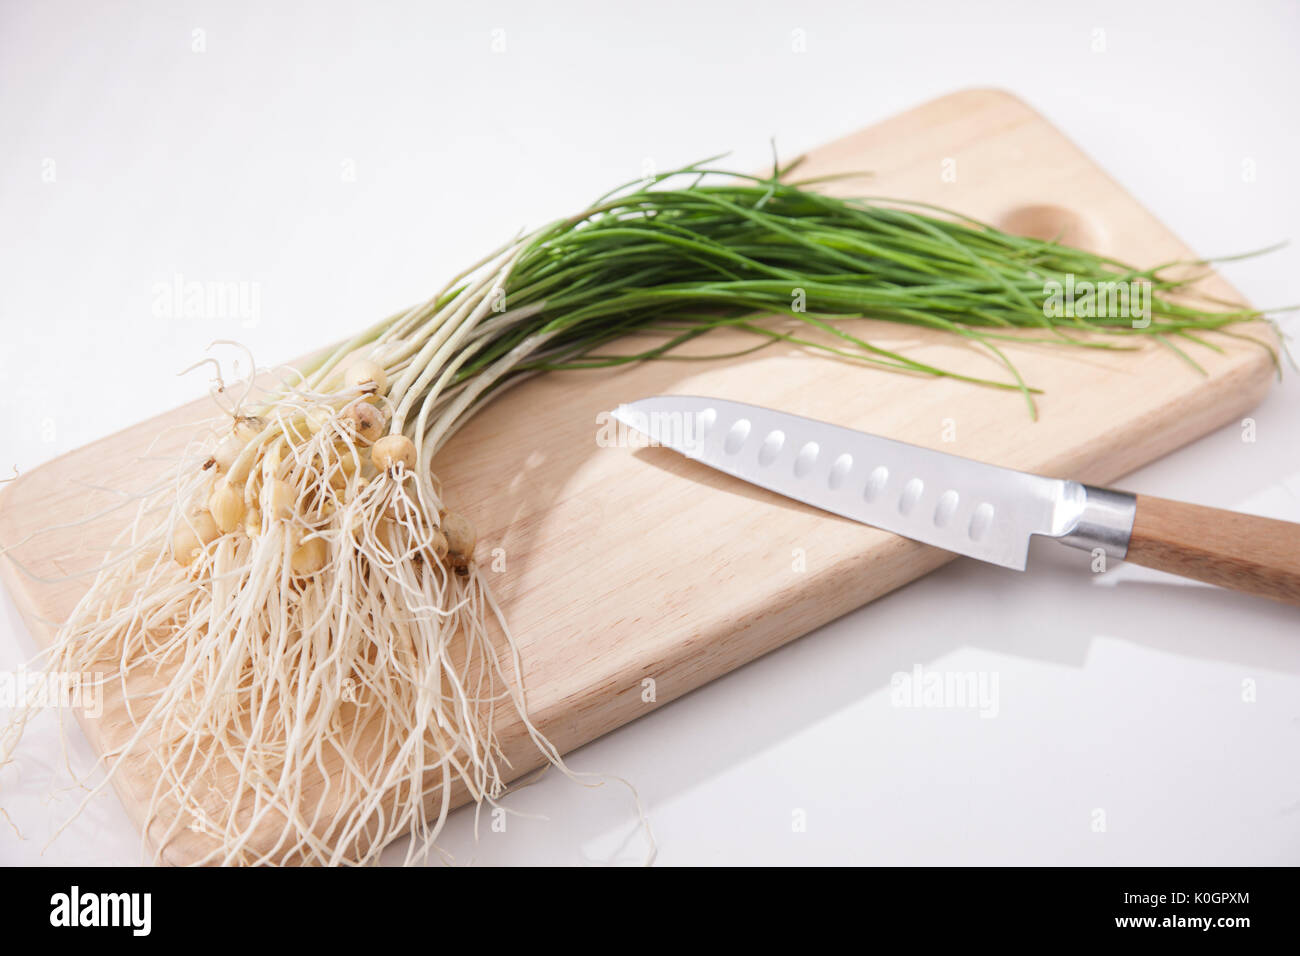 Fresh spring vegetable and kitchen knife on chopping board Stock Photo